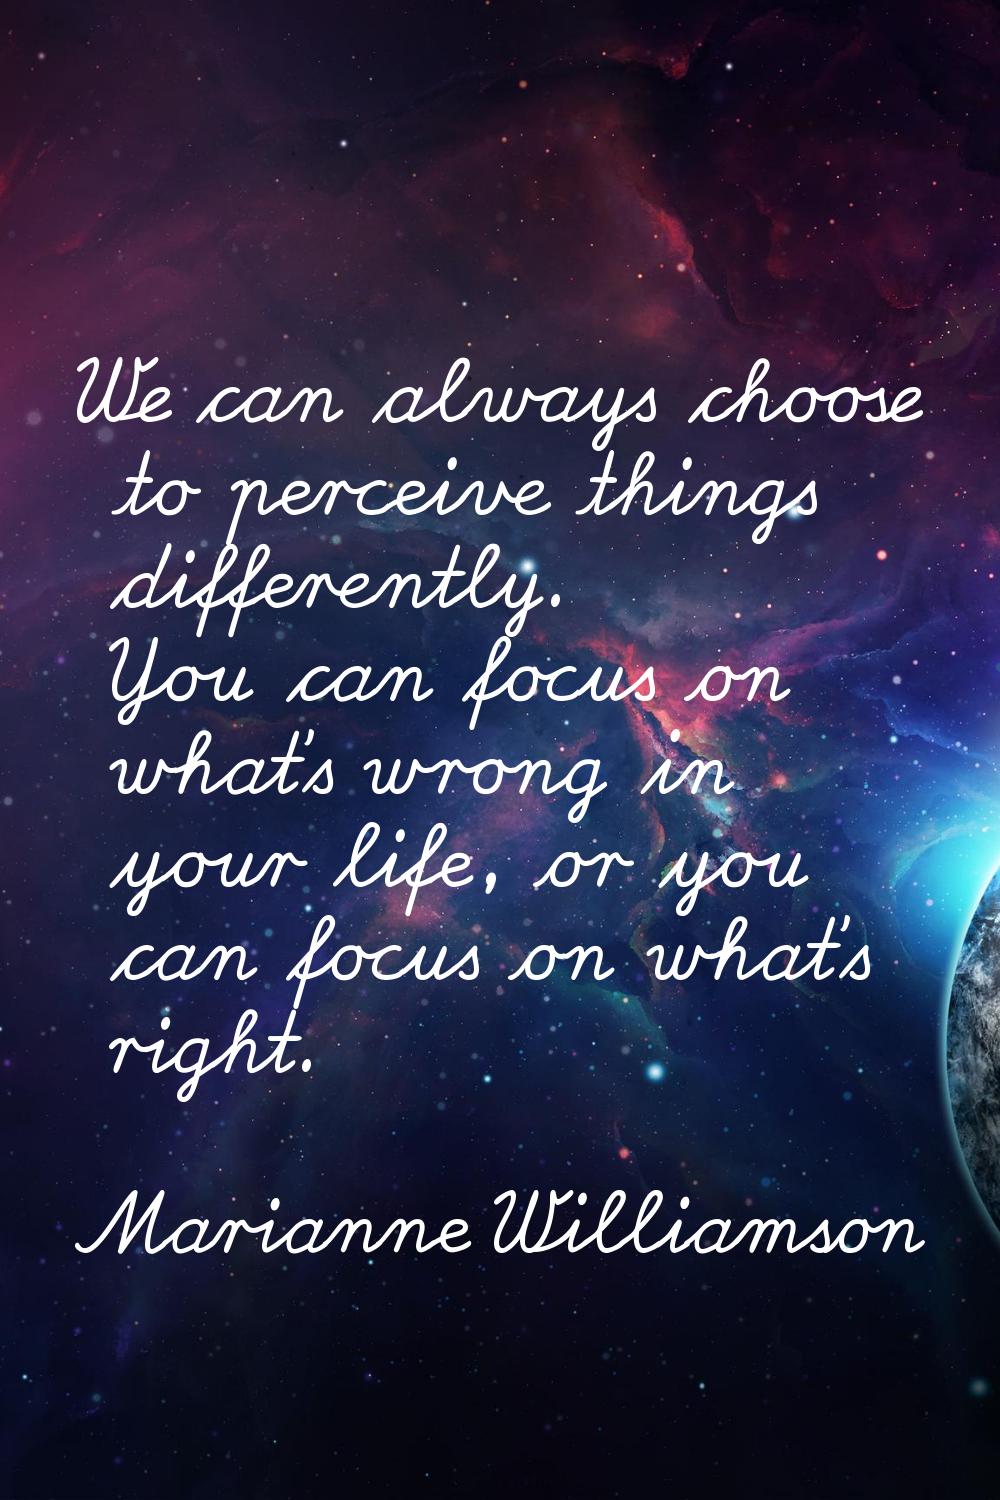 We can always choose to perceive things differently. You can focus on what's wrong in your life, or